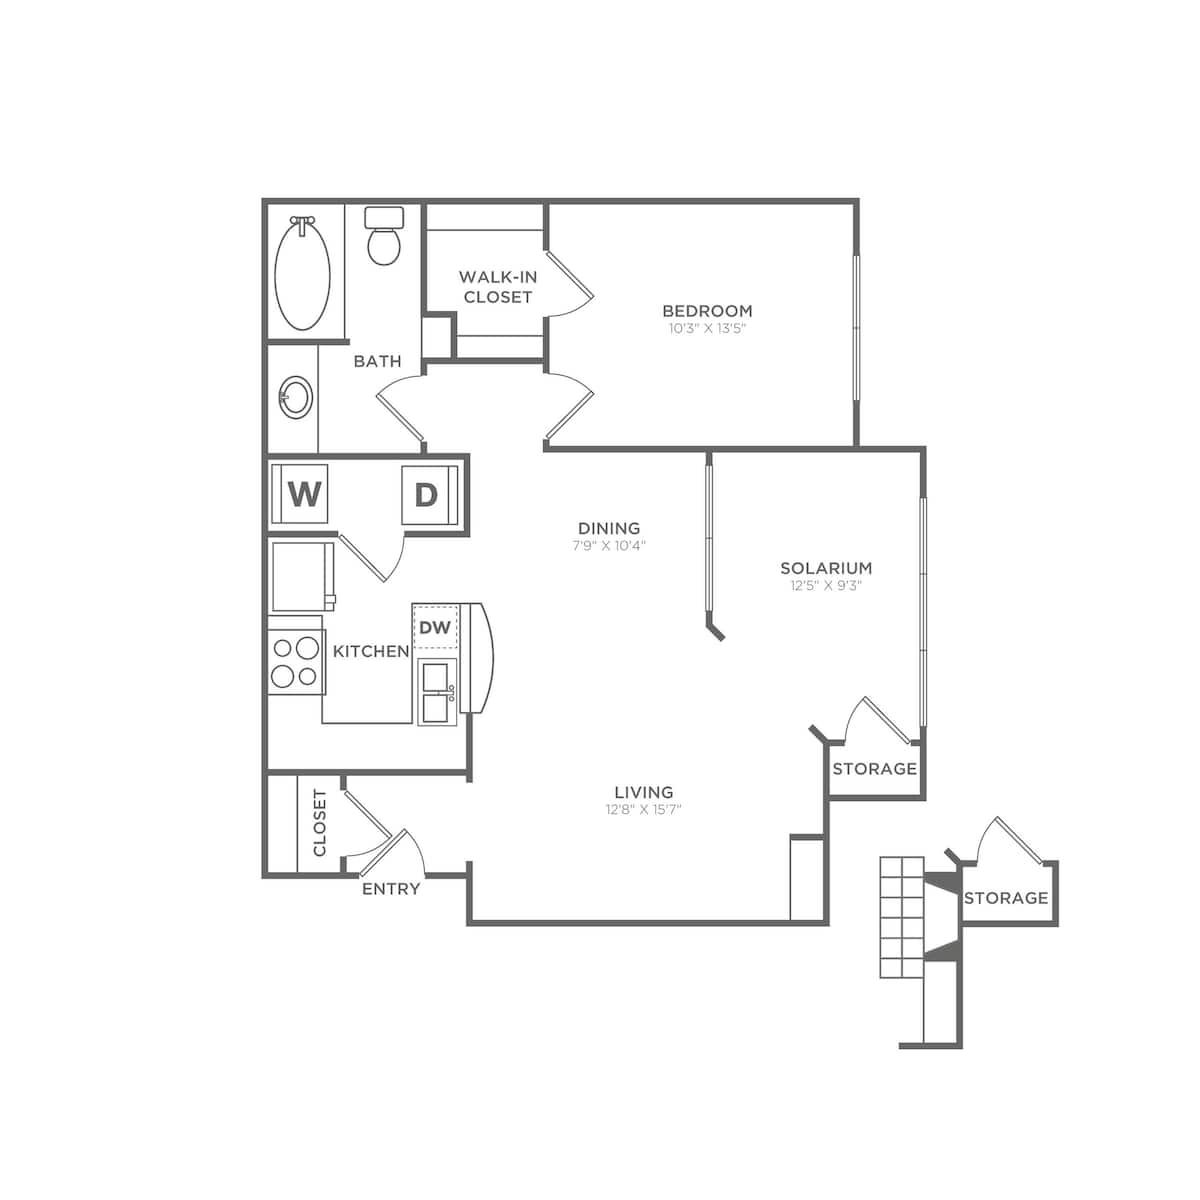 Floorplan diagram for A1s-Classic, showing 1 bedroom